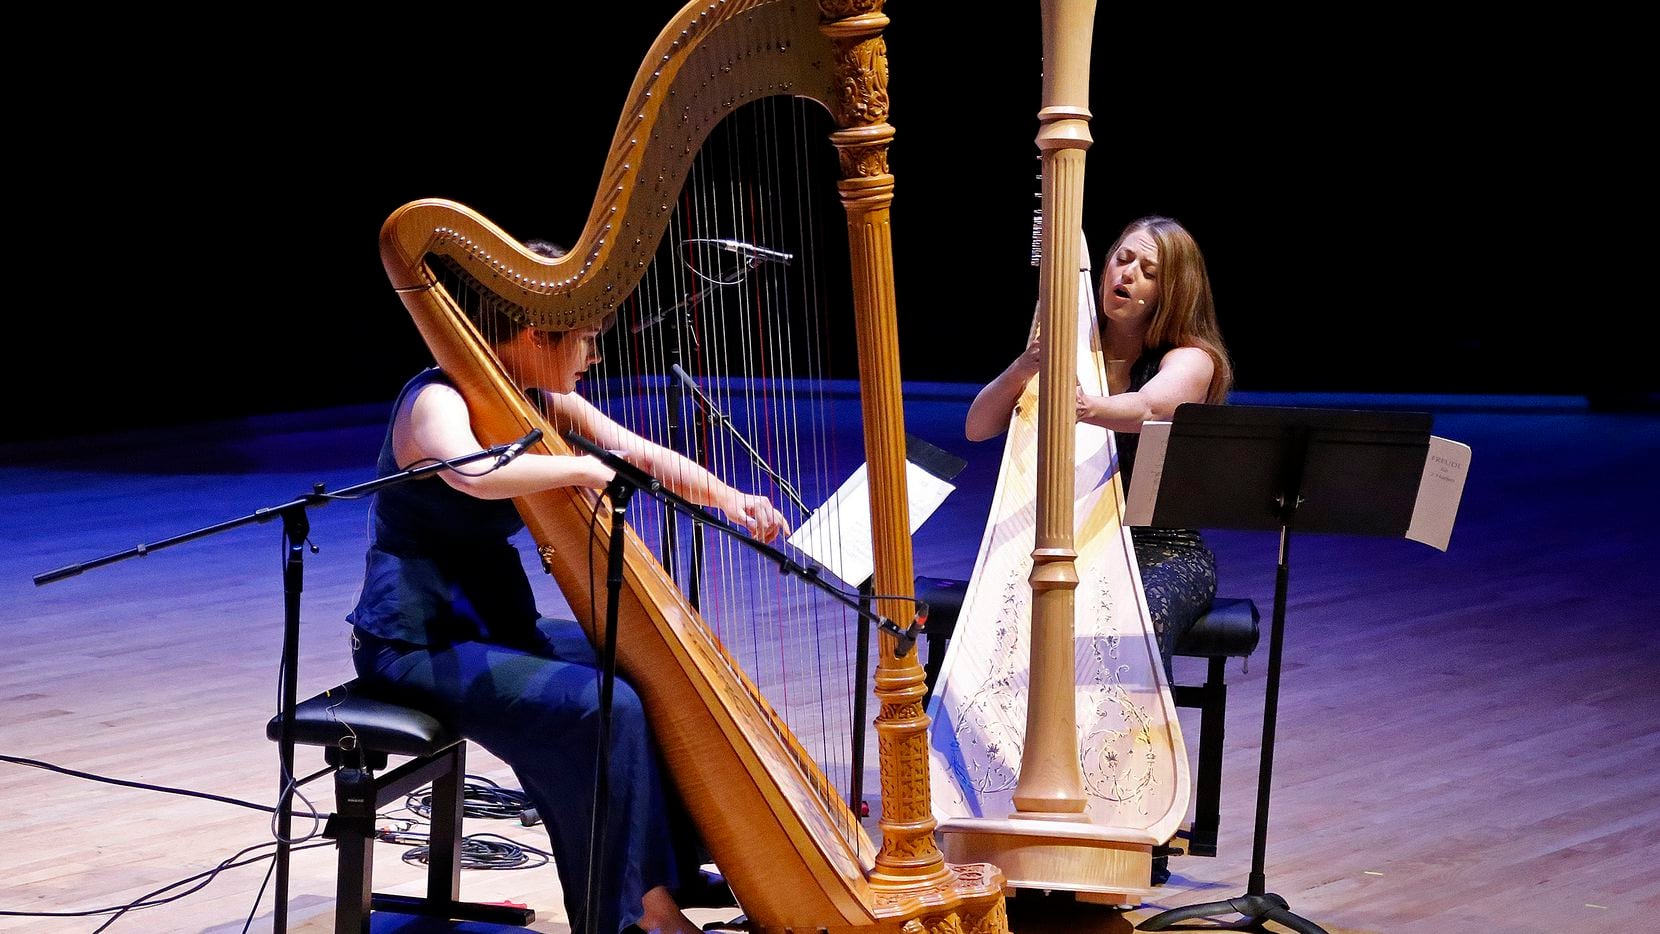 Harpists Emily Levin (left) and Michelle Gott sing while playing harp in a performance of German composer Karlheinz Stockhausen's "Freude" from "Klang" during the Voices of Change concert at Southern Methodist University's Caruth Auditorium in Dallas on Nov. 7.